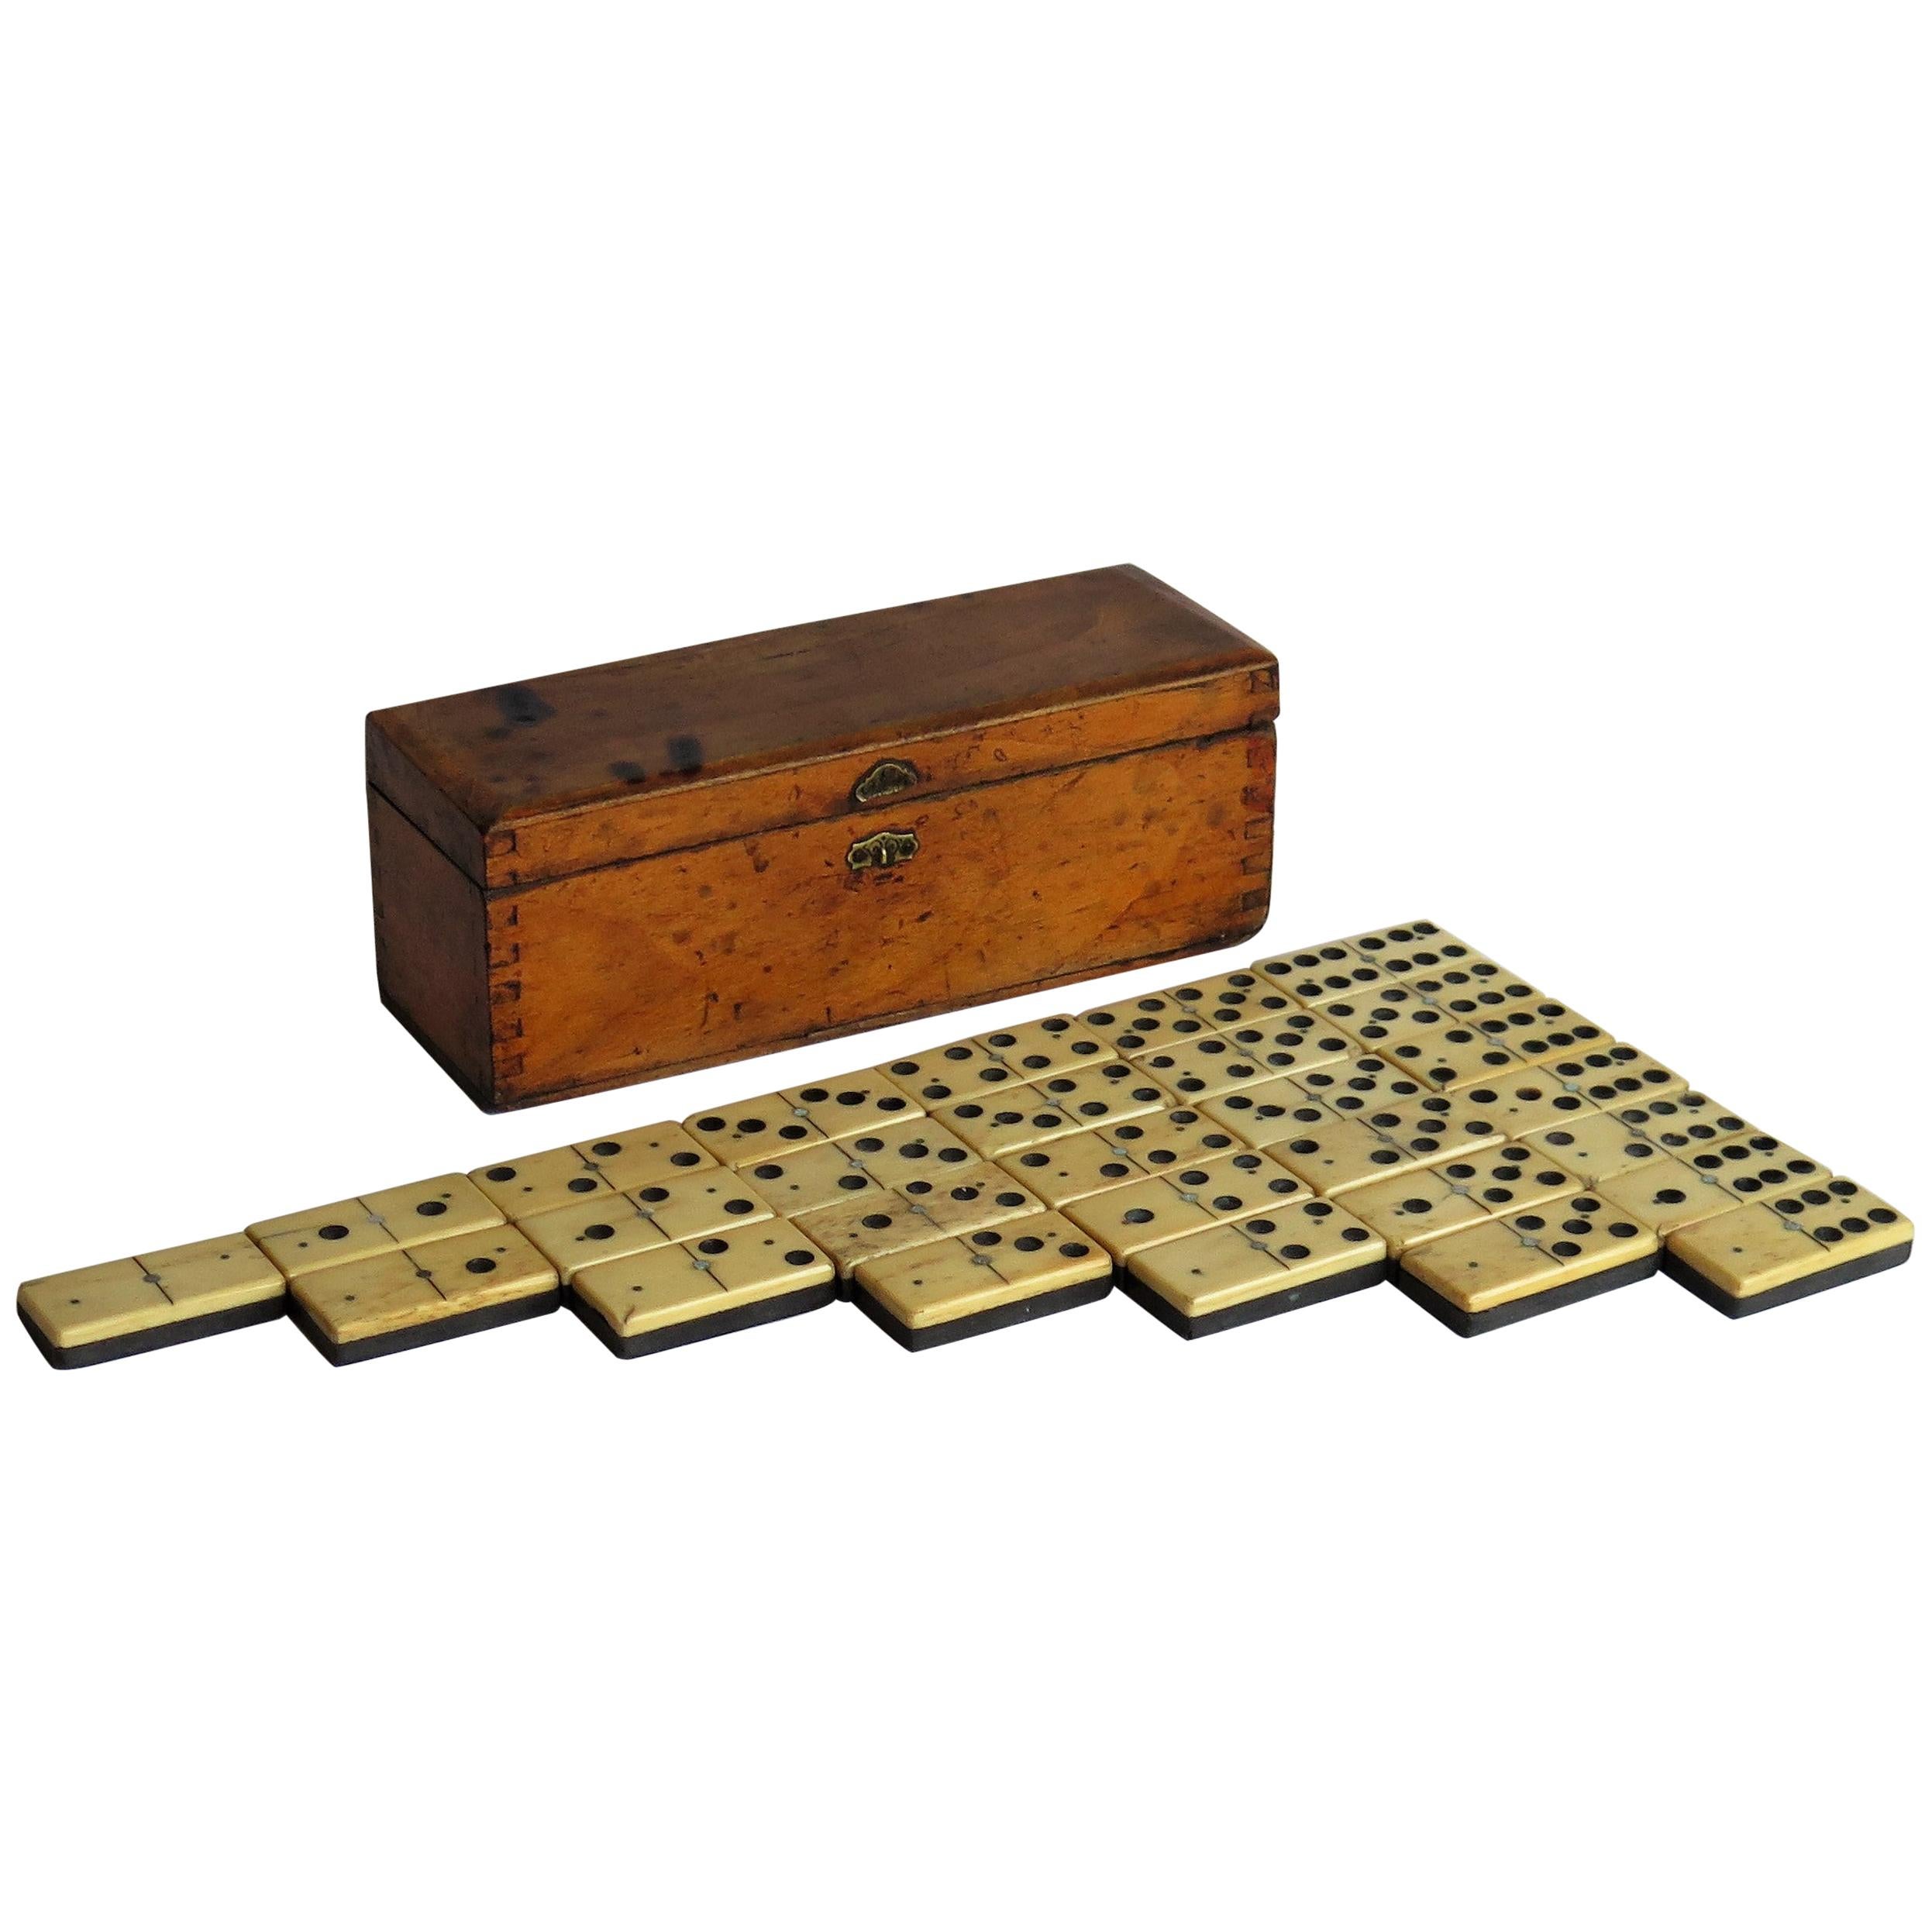 Complete 19th Century Domino Game in Hardwood Jointed Box, circa 1870